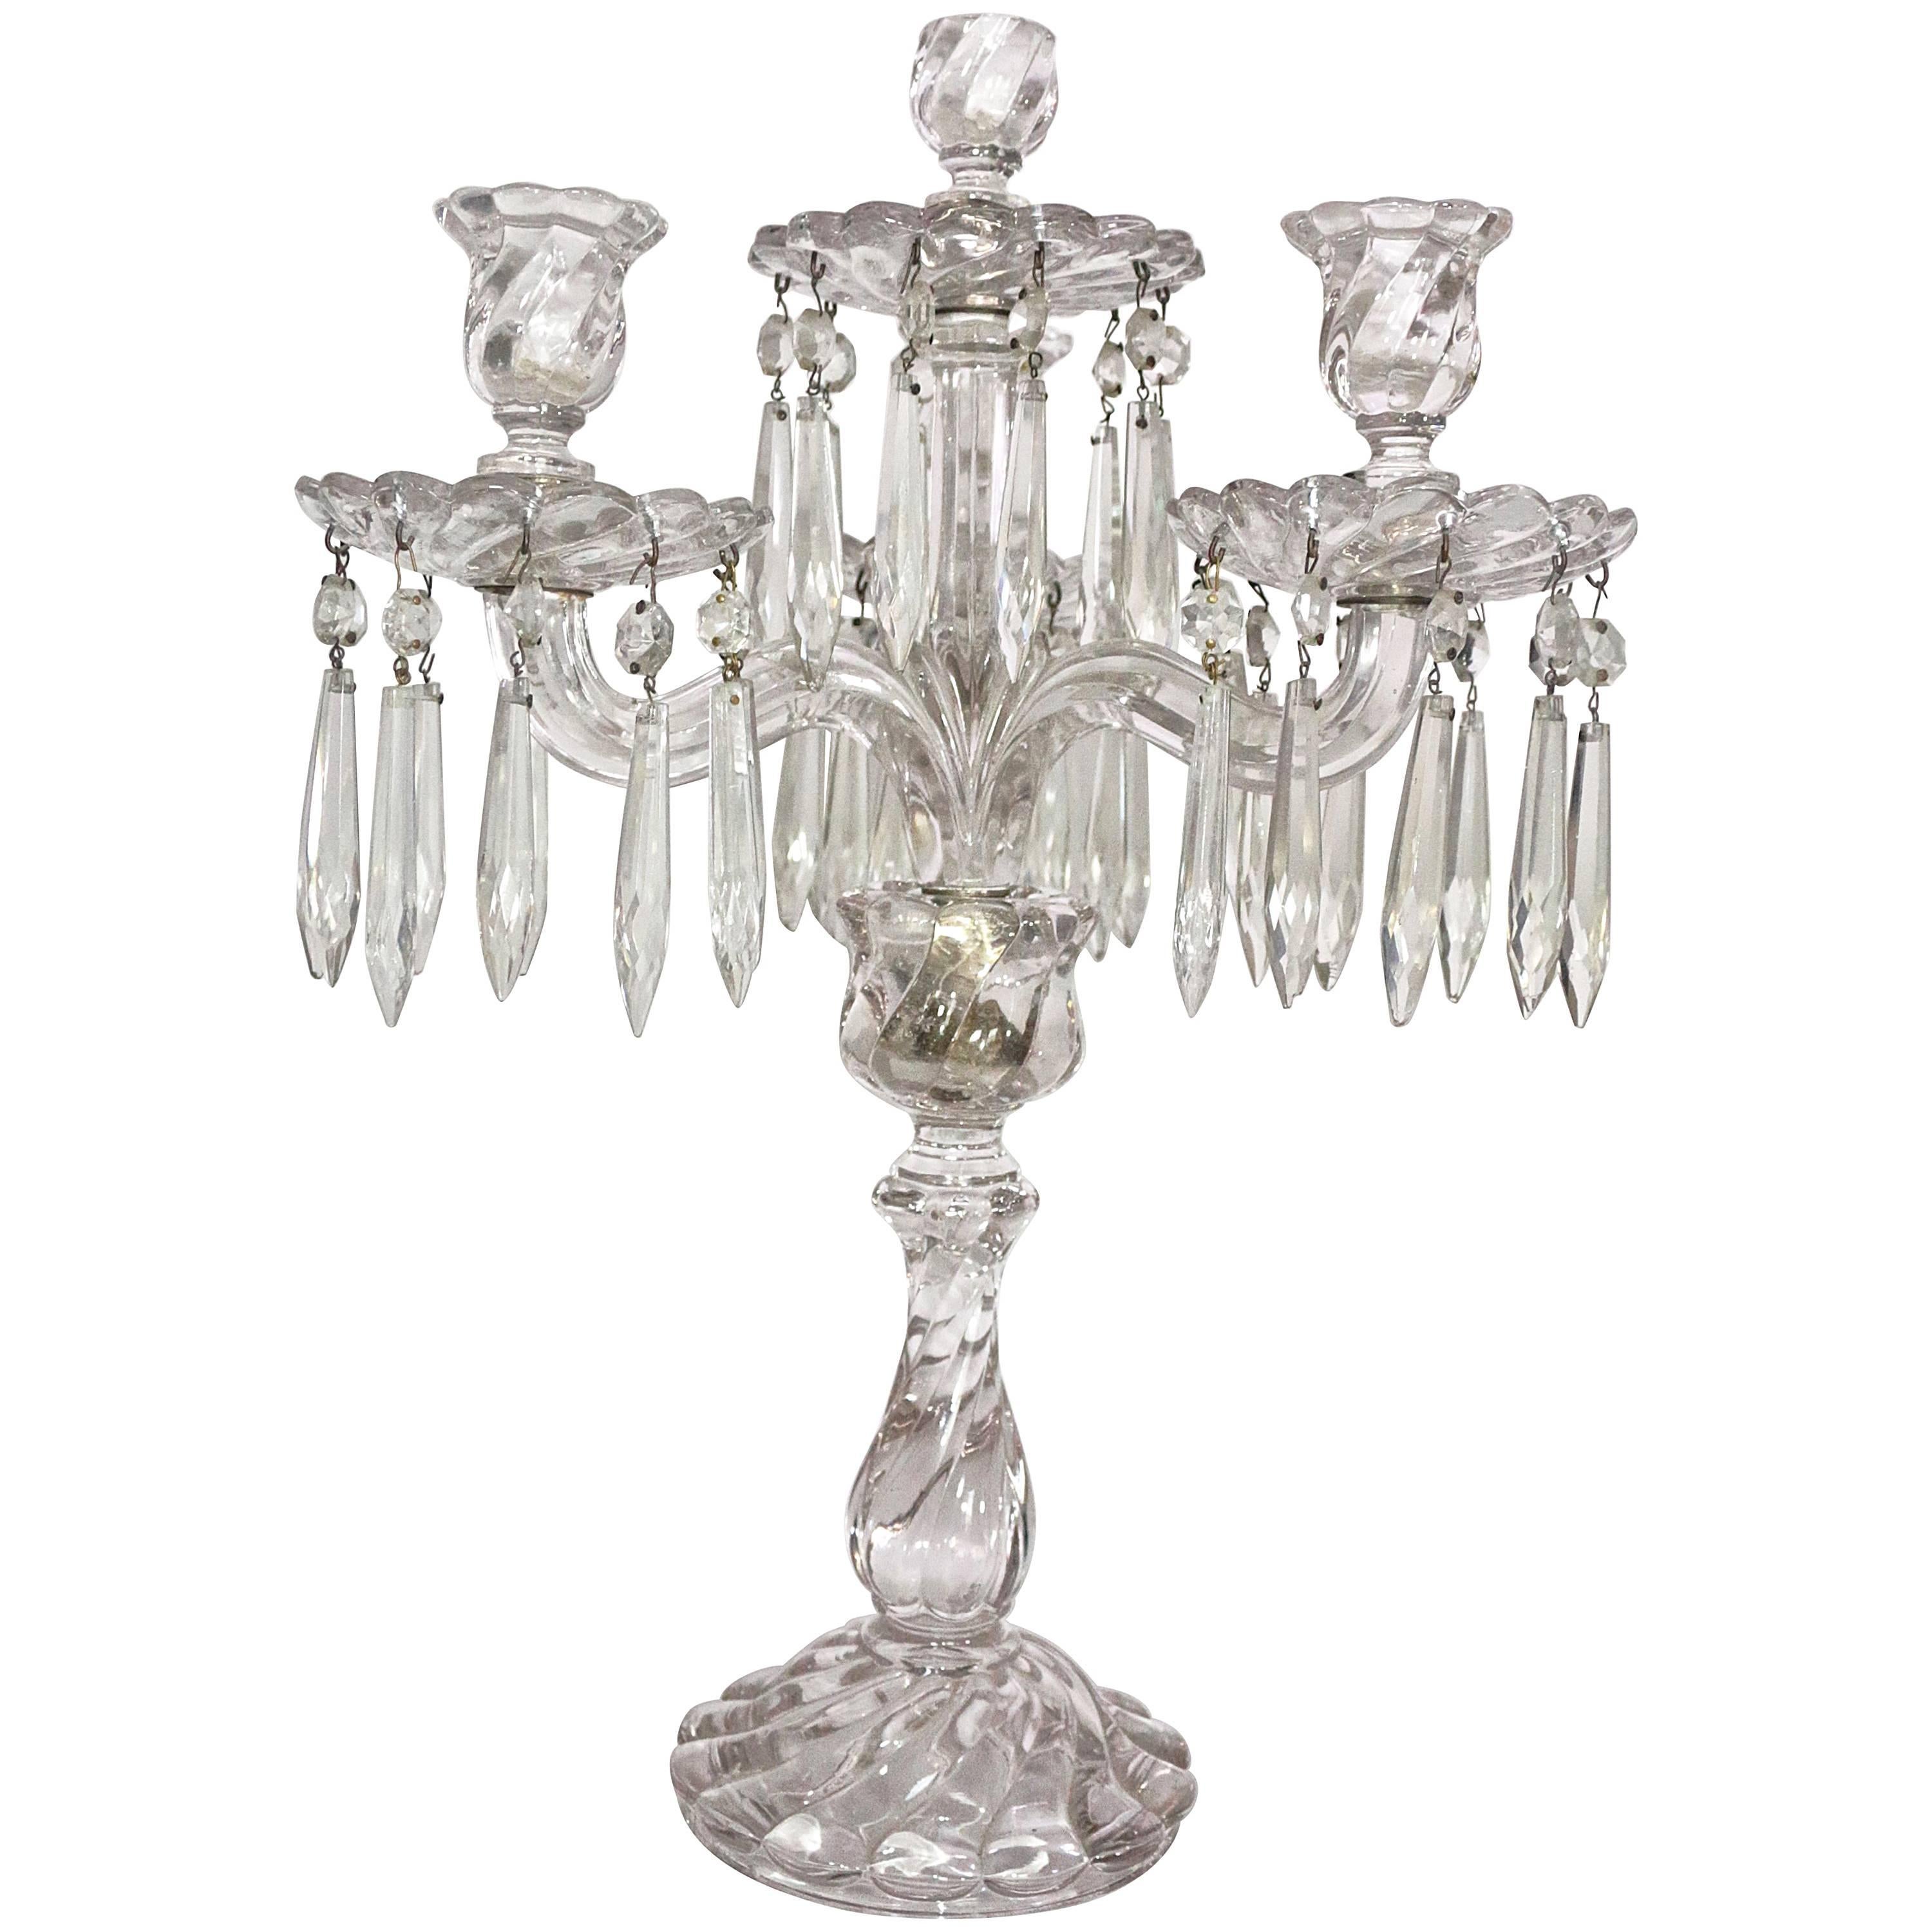 Baccarat 19th Century Table Candelabra